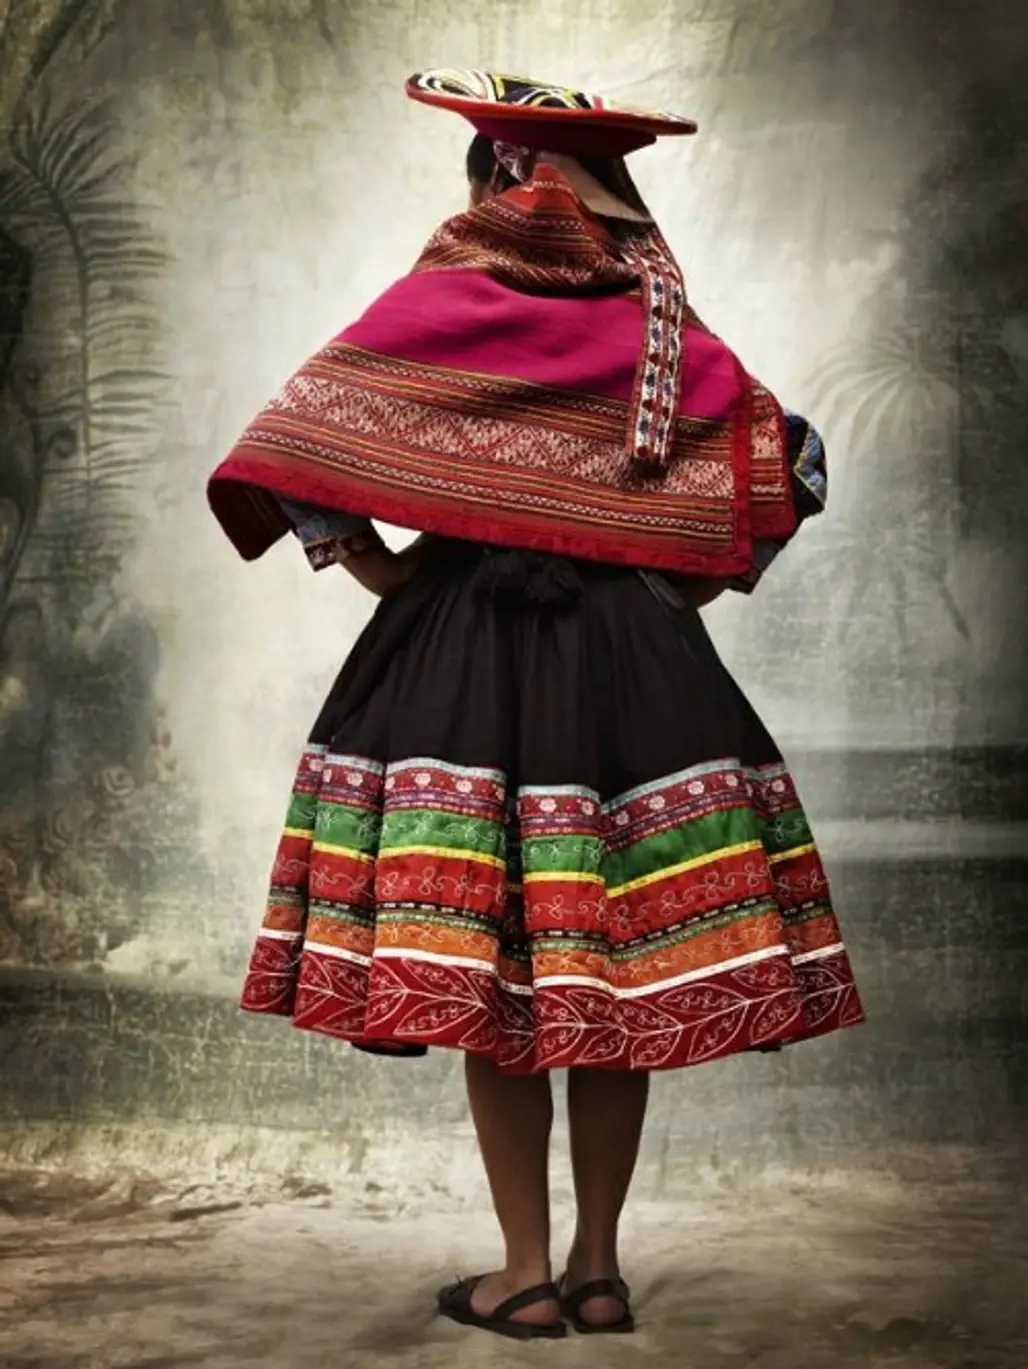 50 Traditional Clothes Around the World: Embracing Diversity in